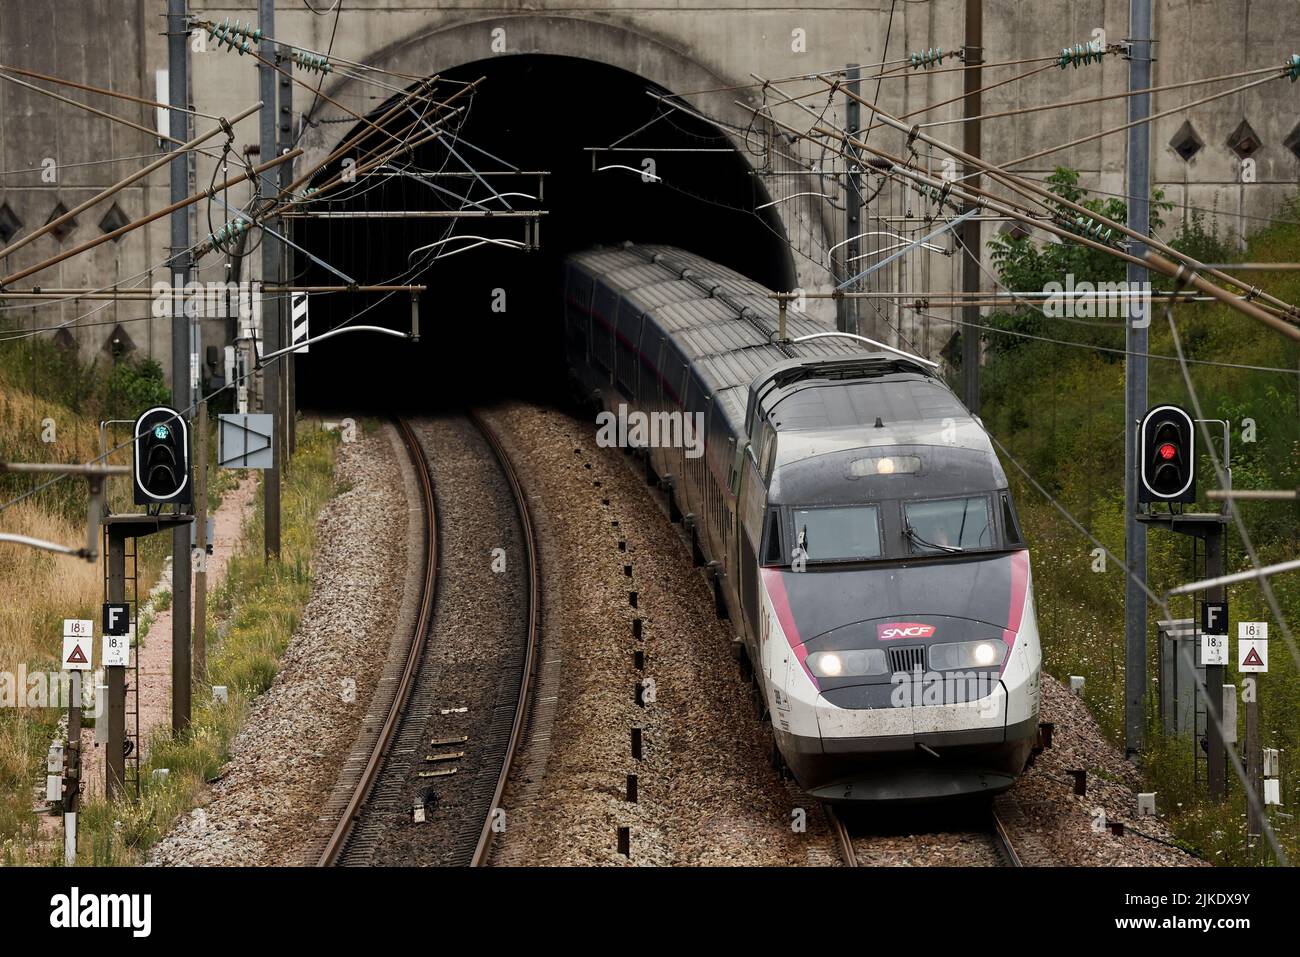 A TGV inOui high-speed train operated by state-owned railway company SNCF is seen on a rail track outside Villebon-Sur-Yvette, near Paris, France, August 1, 2022. REUTERS/Benoit Tessier Stock Photo